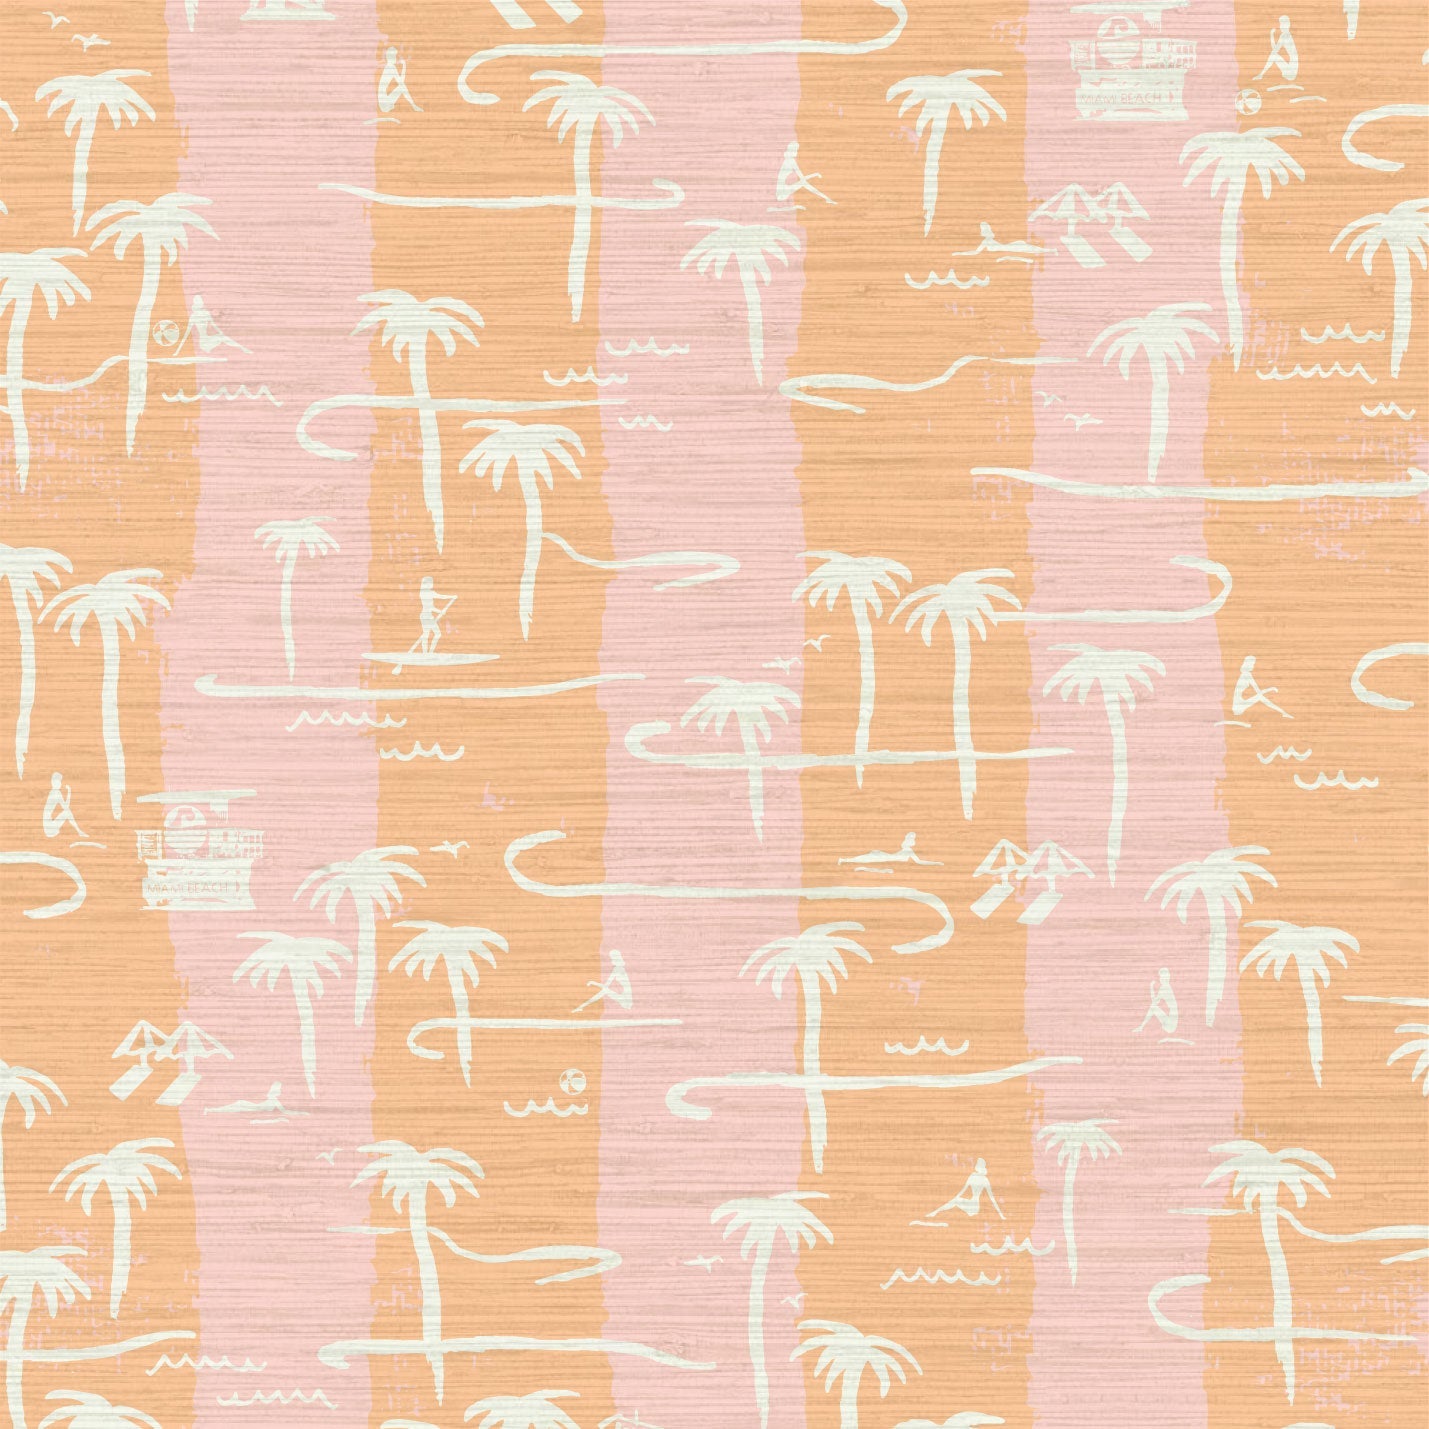 two color vertical stripe beach print featuring palm trees, beachgoers, lifeguard stands and ocean waves Grasscloth Natural Textured Eco-Friendly Non-toxic High-quality Sustainable practices Sustainability Interior Design Wall covering Bold Wallpaper Custom Tailor-made Retro chic Tropical Seaside Coastal Seashore Waterfront Vacation home styling Retreat Relaxed beach vibes Beach cottage Shoreline Oceanfront Nautical pink baby orange sunset tangerine coral